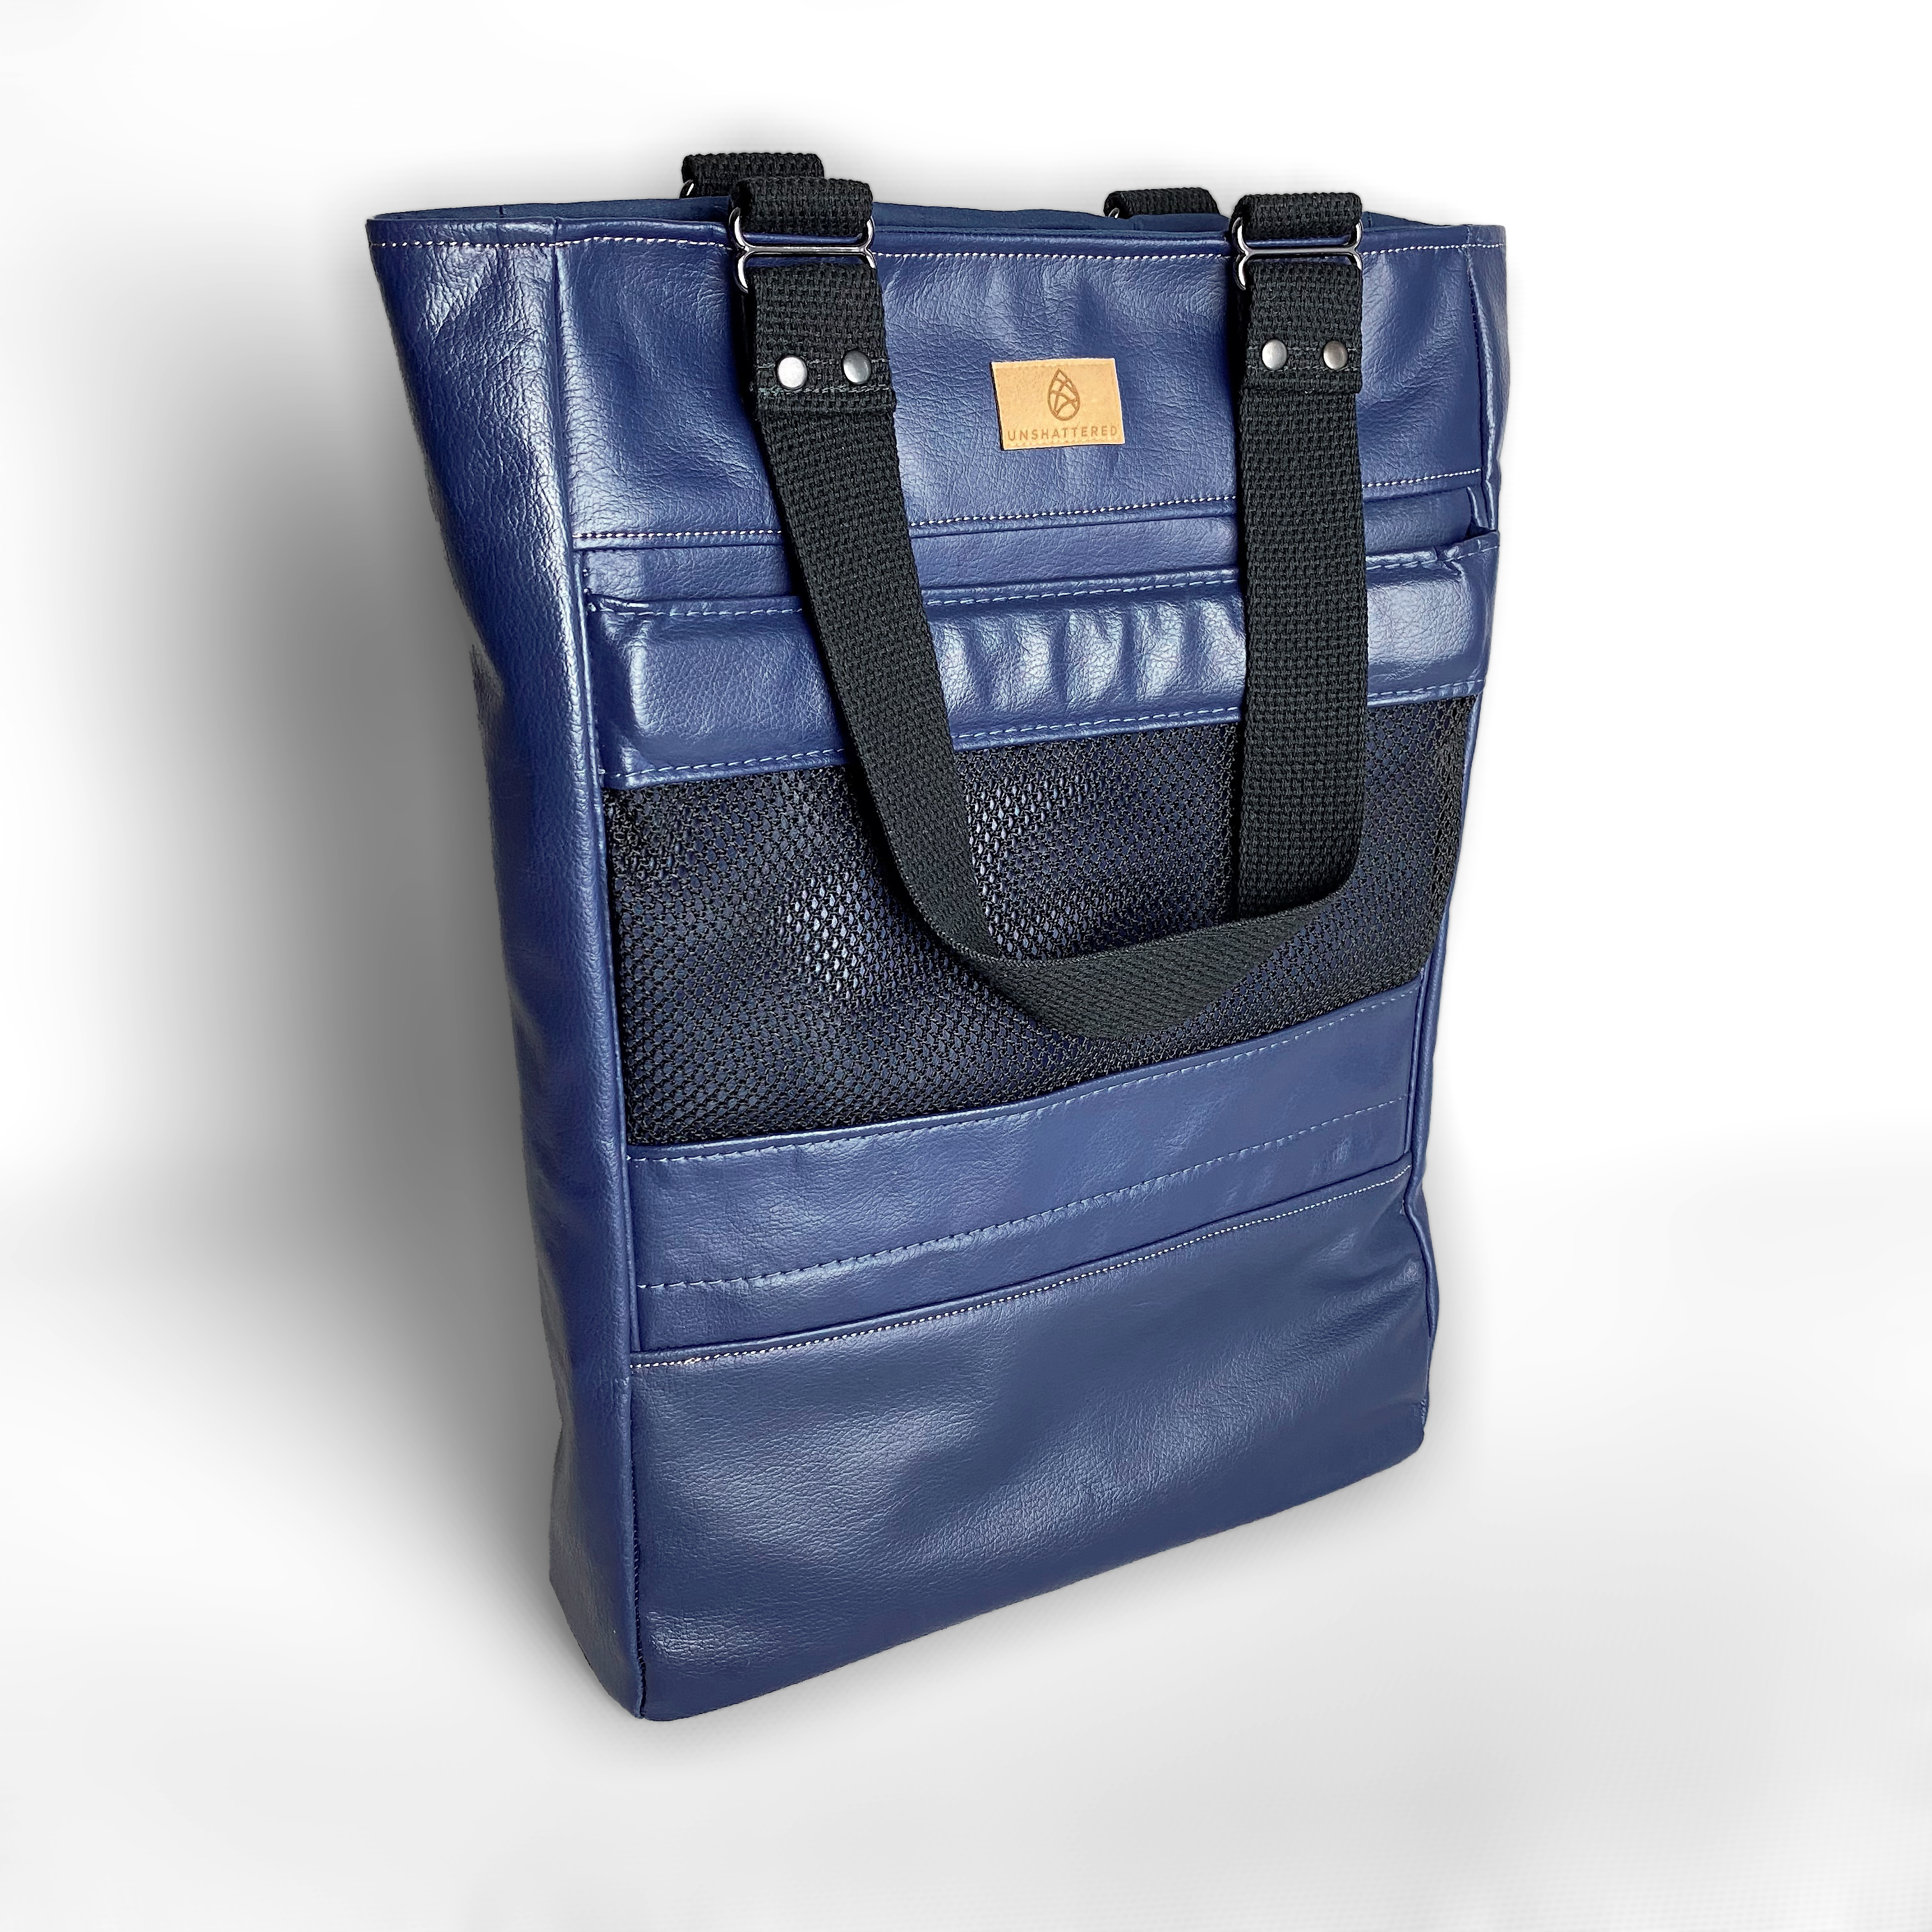 Travel Tote from Southwest Airlines Leather